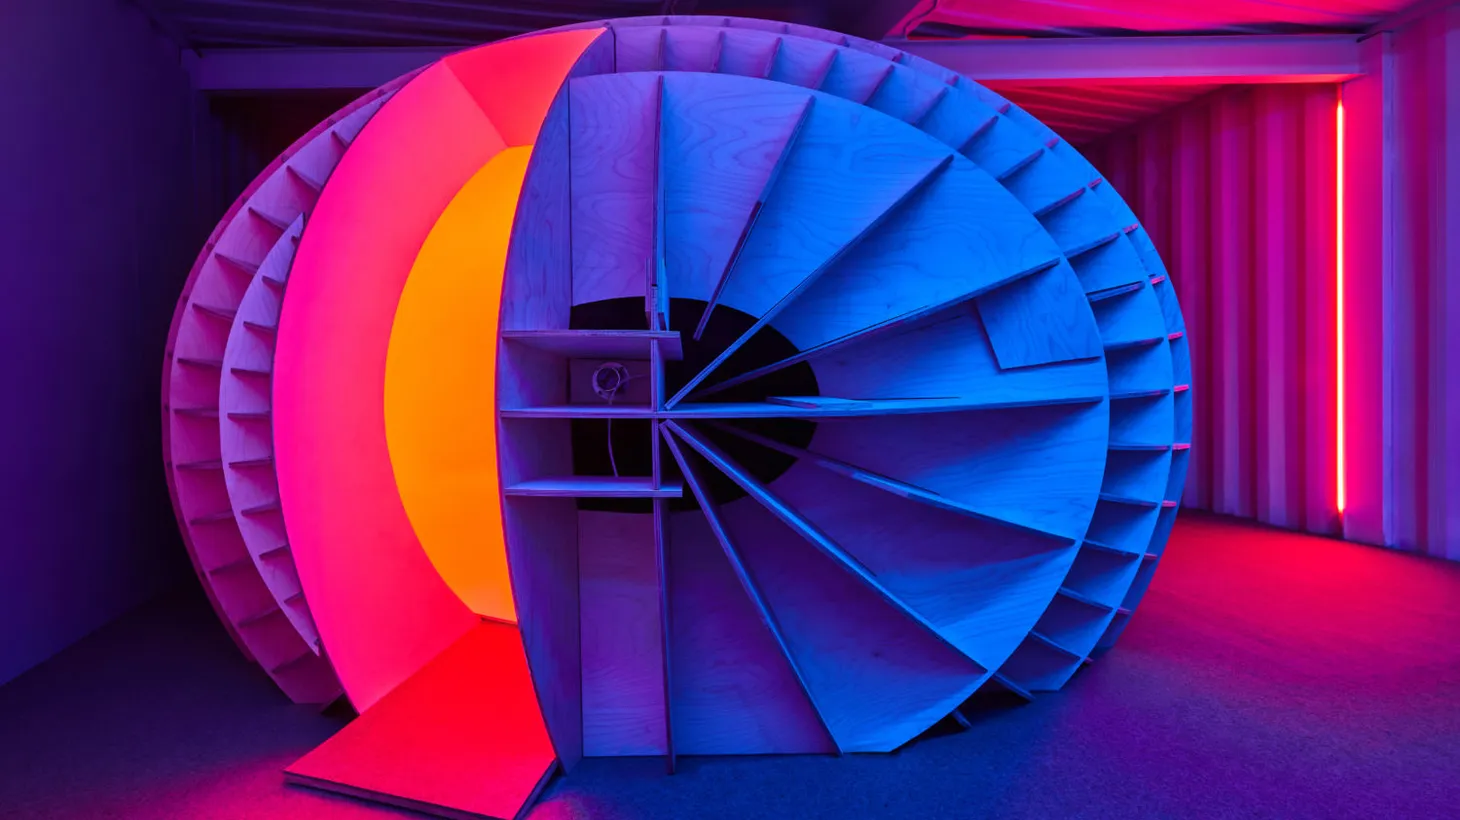 “Satellite One,” an art installation by Chromasonic in Venice, allows participants to hear sound and see color inside this pod.